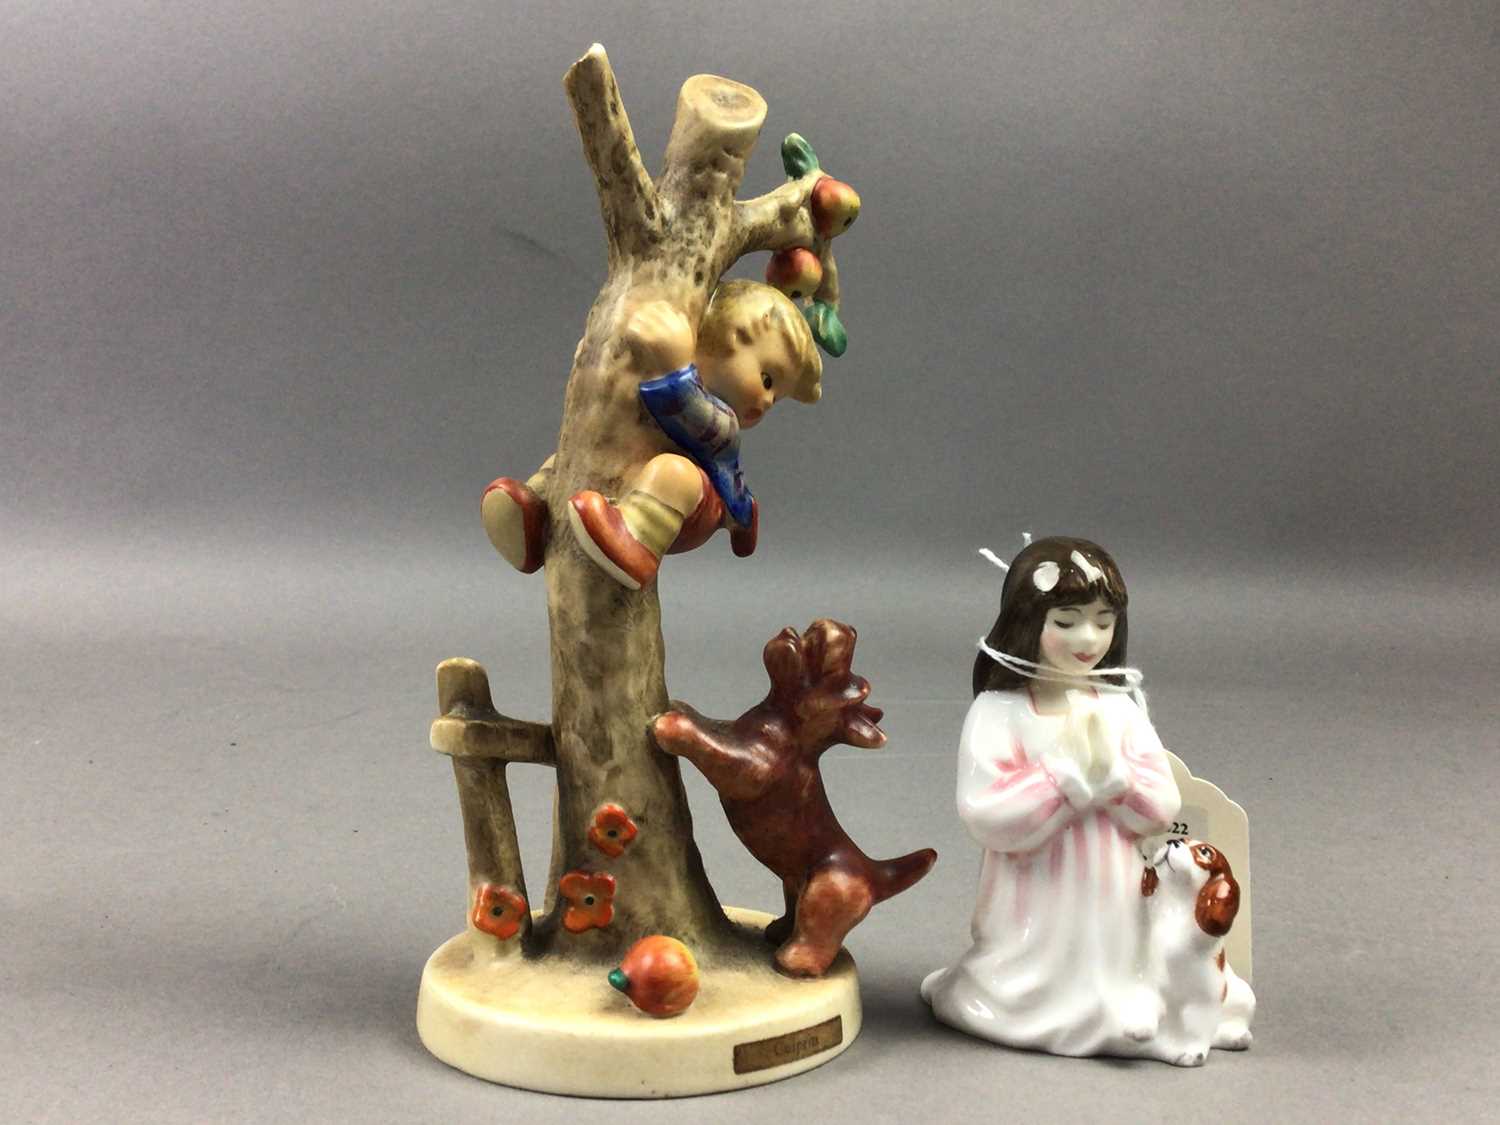 A LLADRO MODEL OF A DOG, A DOULTON FIGURE OF A GIRL AND A HUMMEL FIGURE - Image 2 of 2